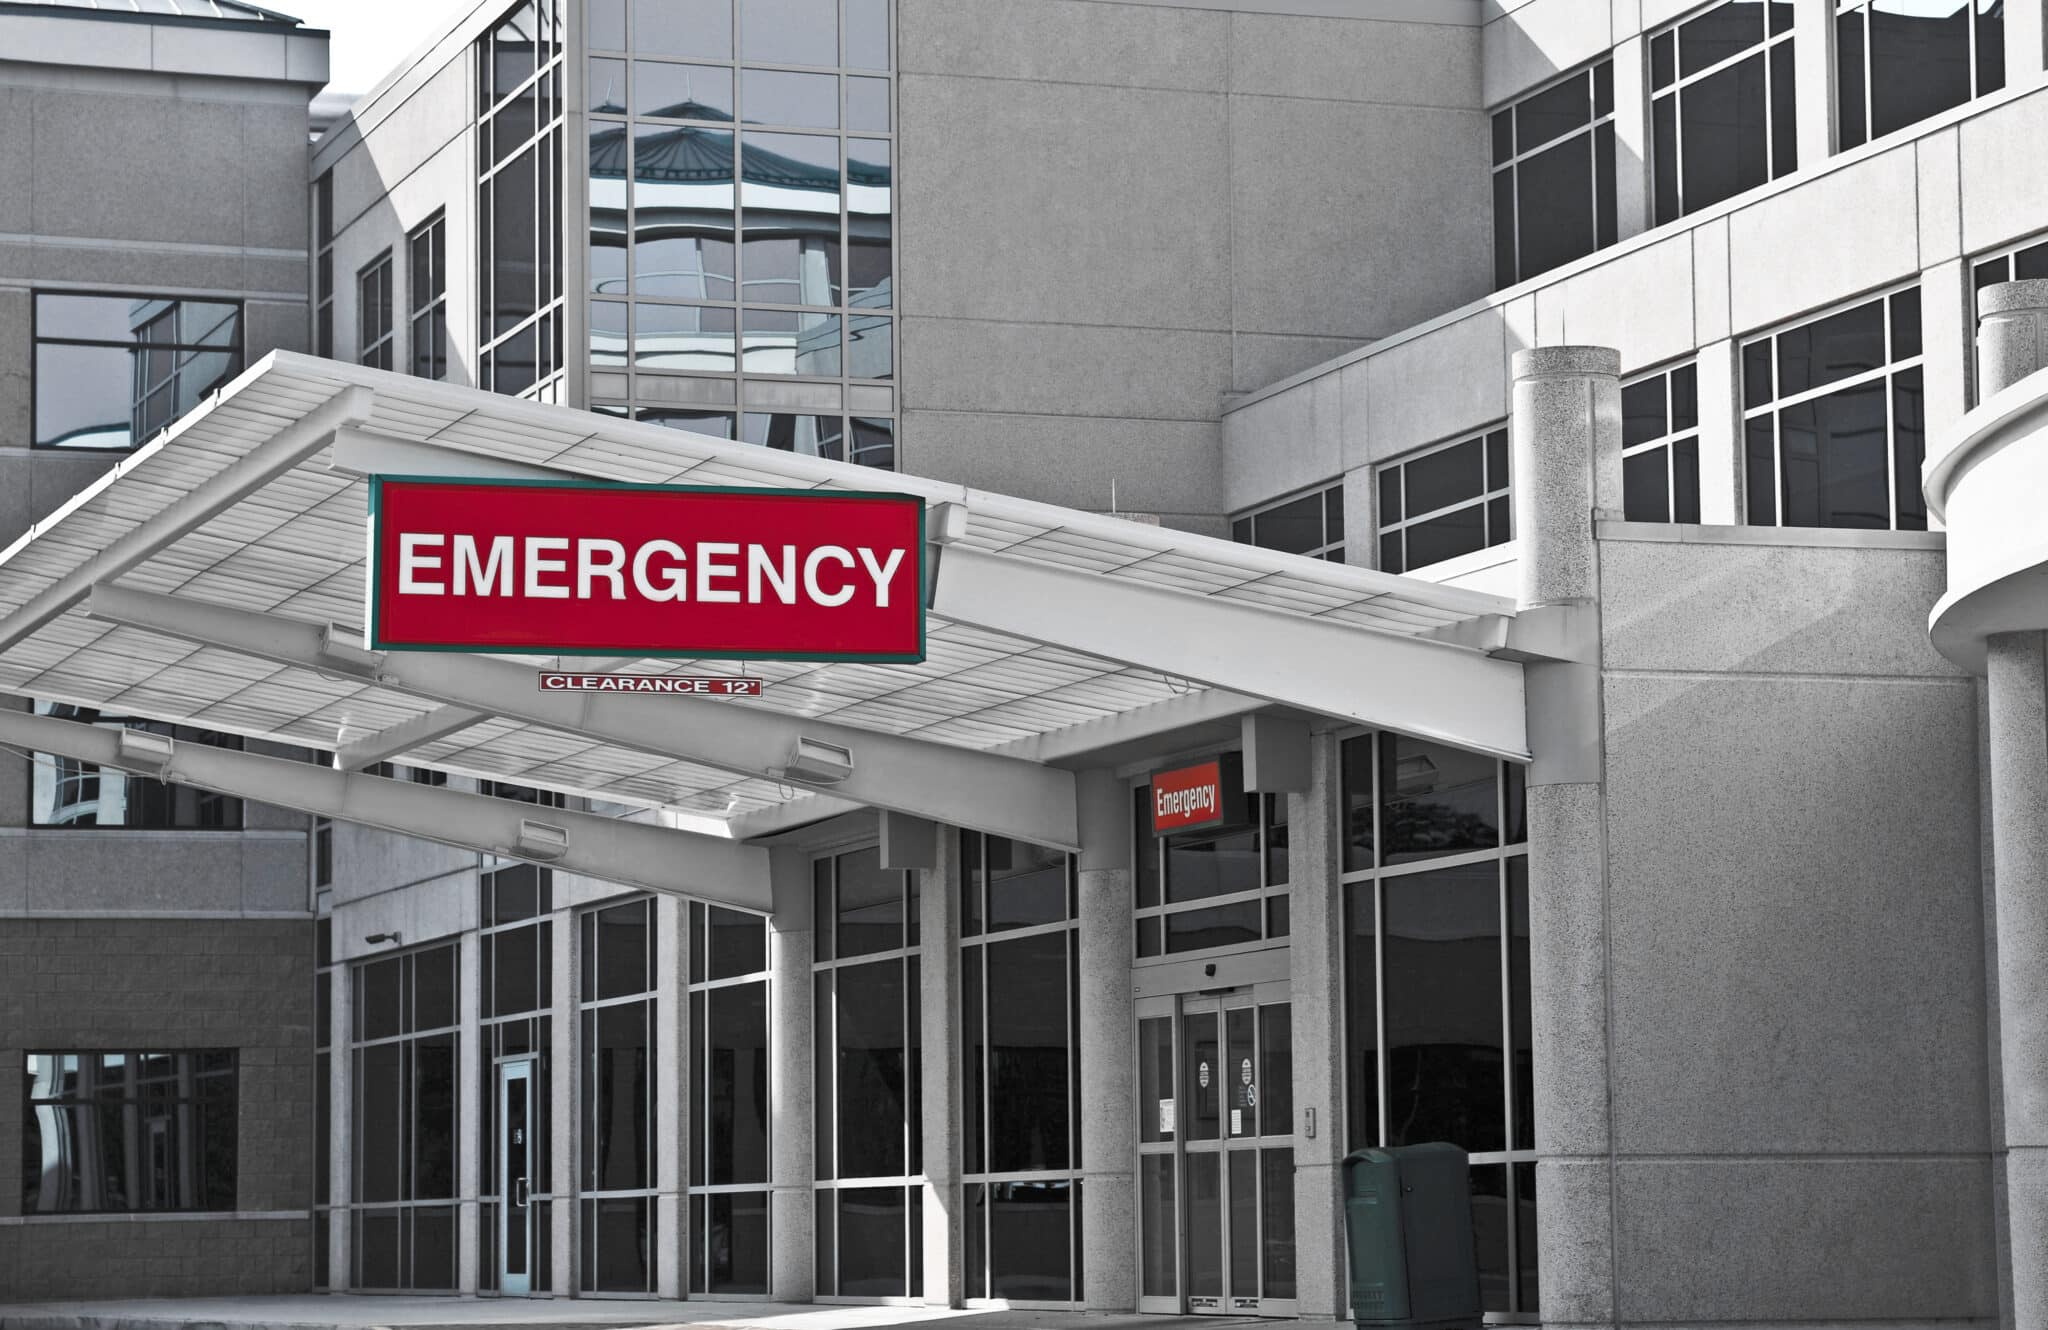 Emergency Room or Urgent Care? Where should you take your child?